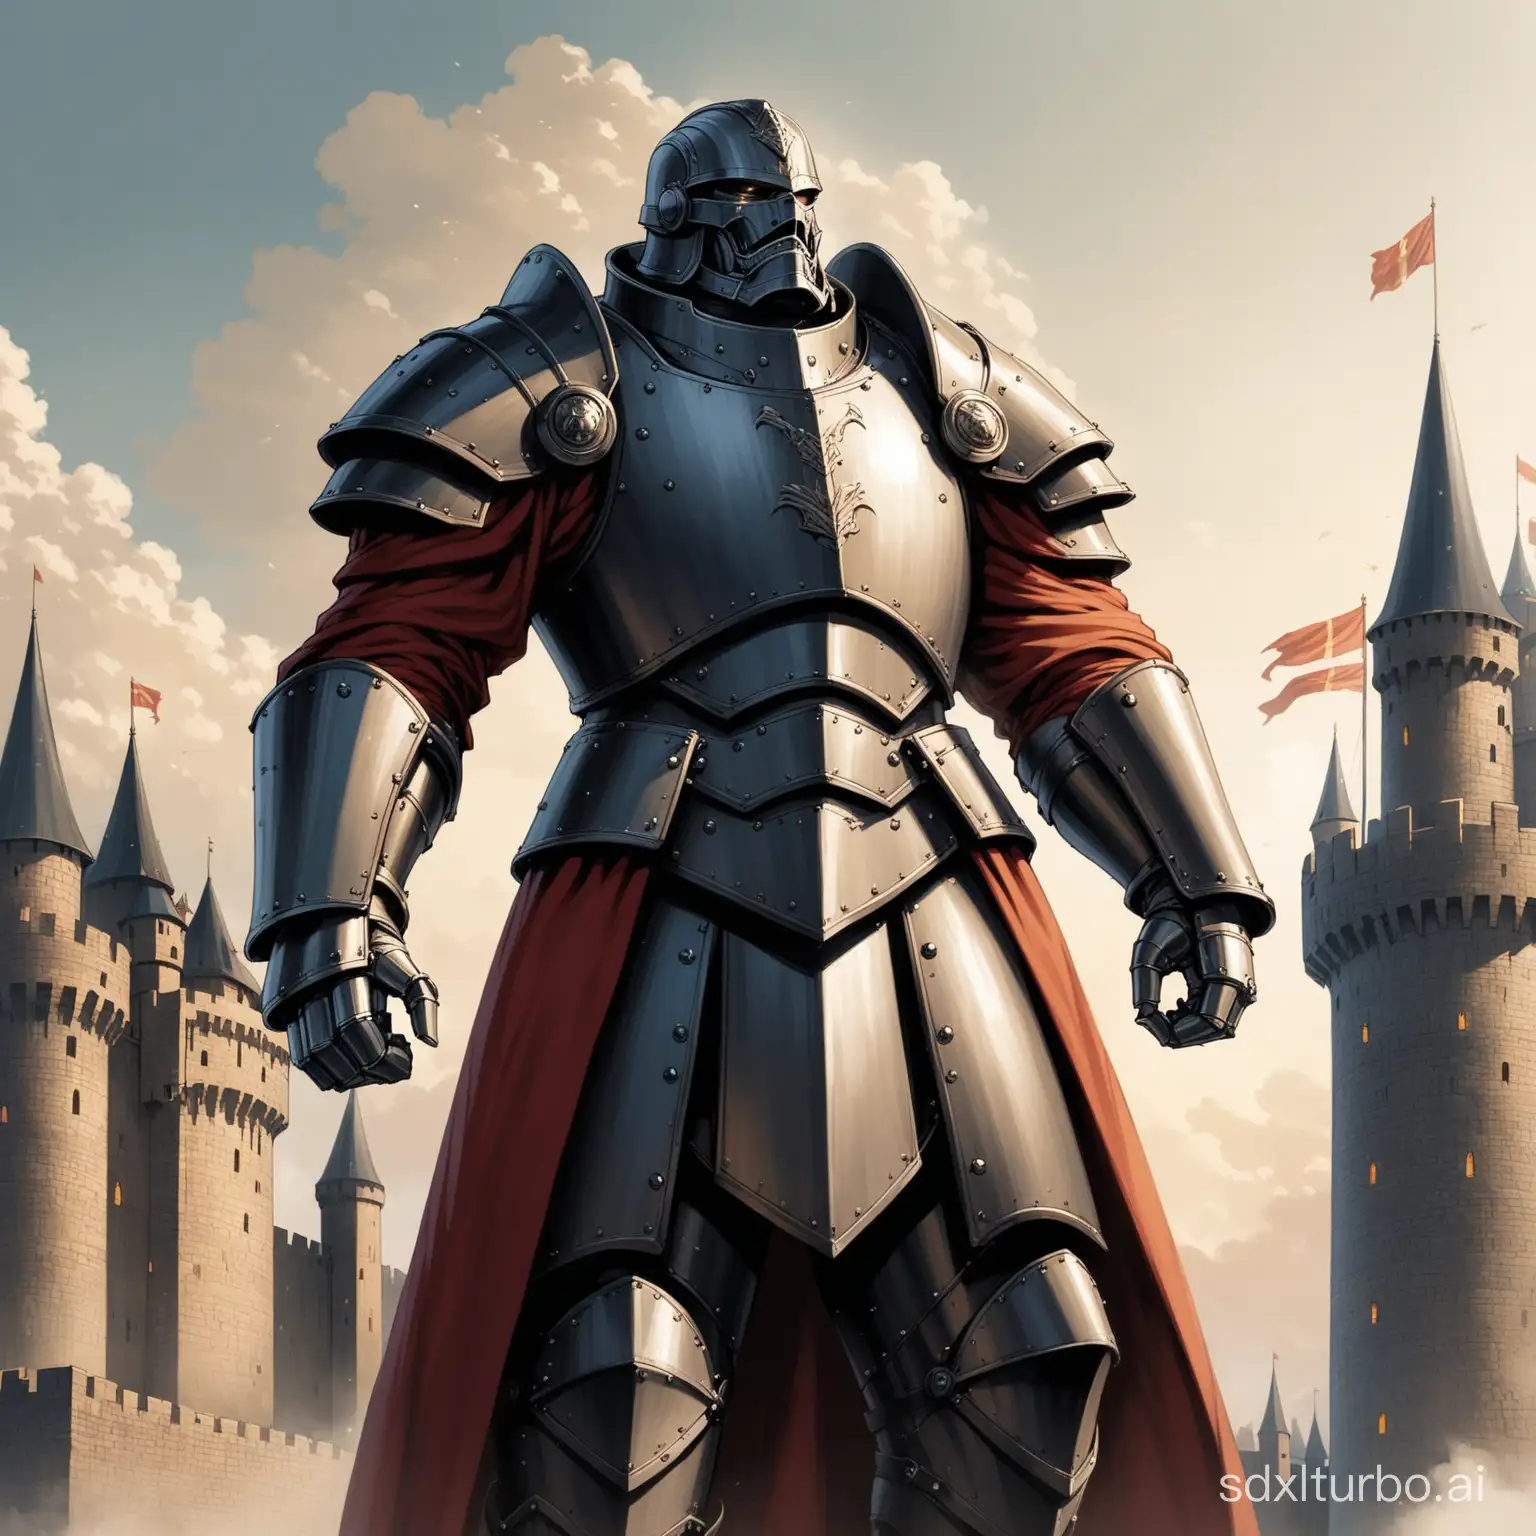 The iron general, imposing and dignified, is defending the castle.